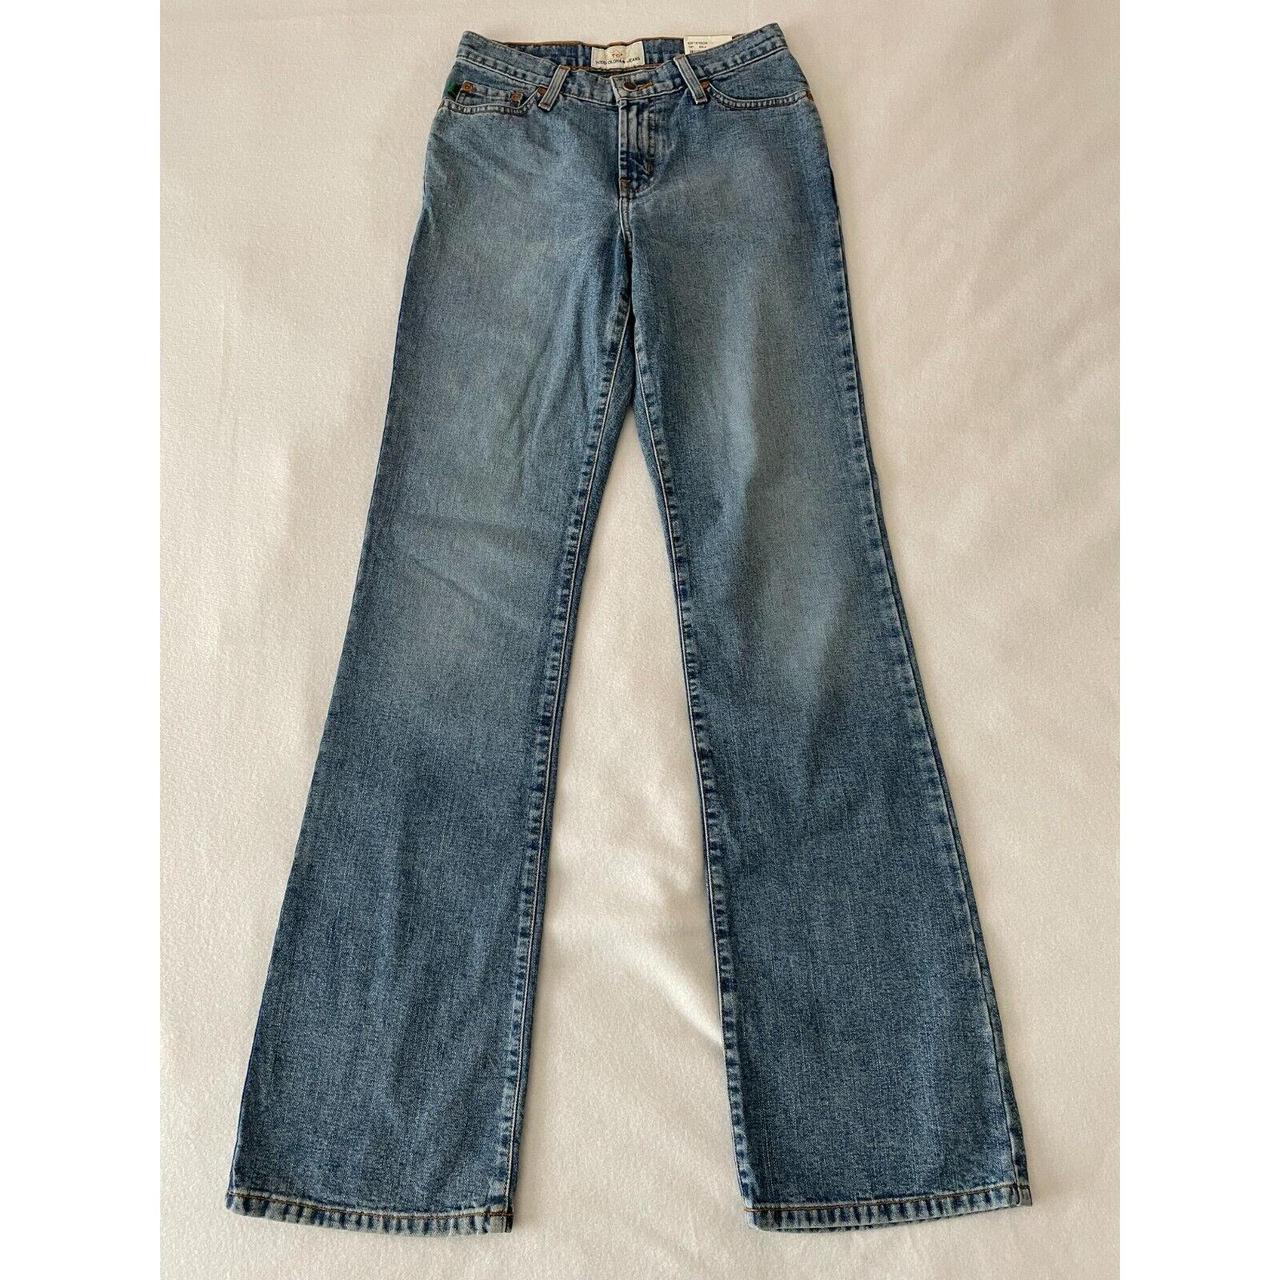 Product Image 2 - Todd Oldham Jeans Womens Mid